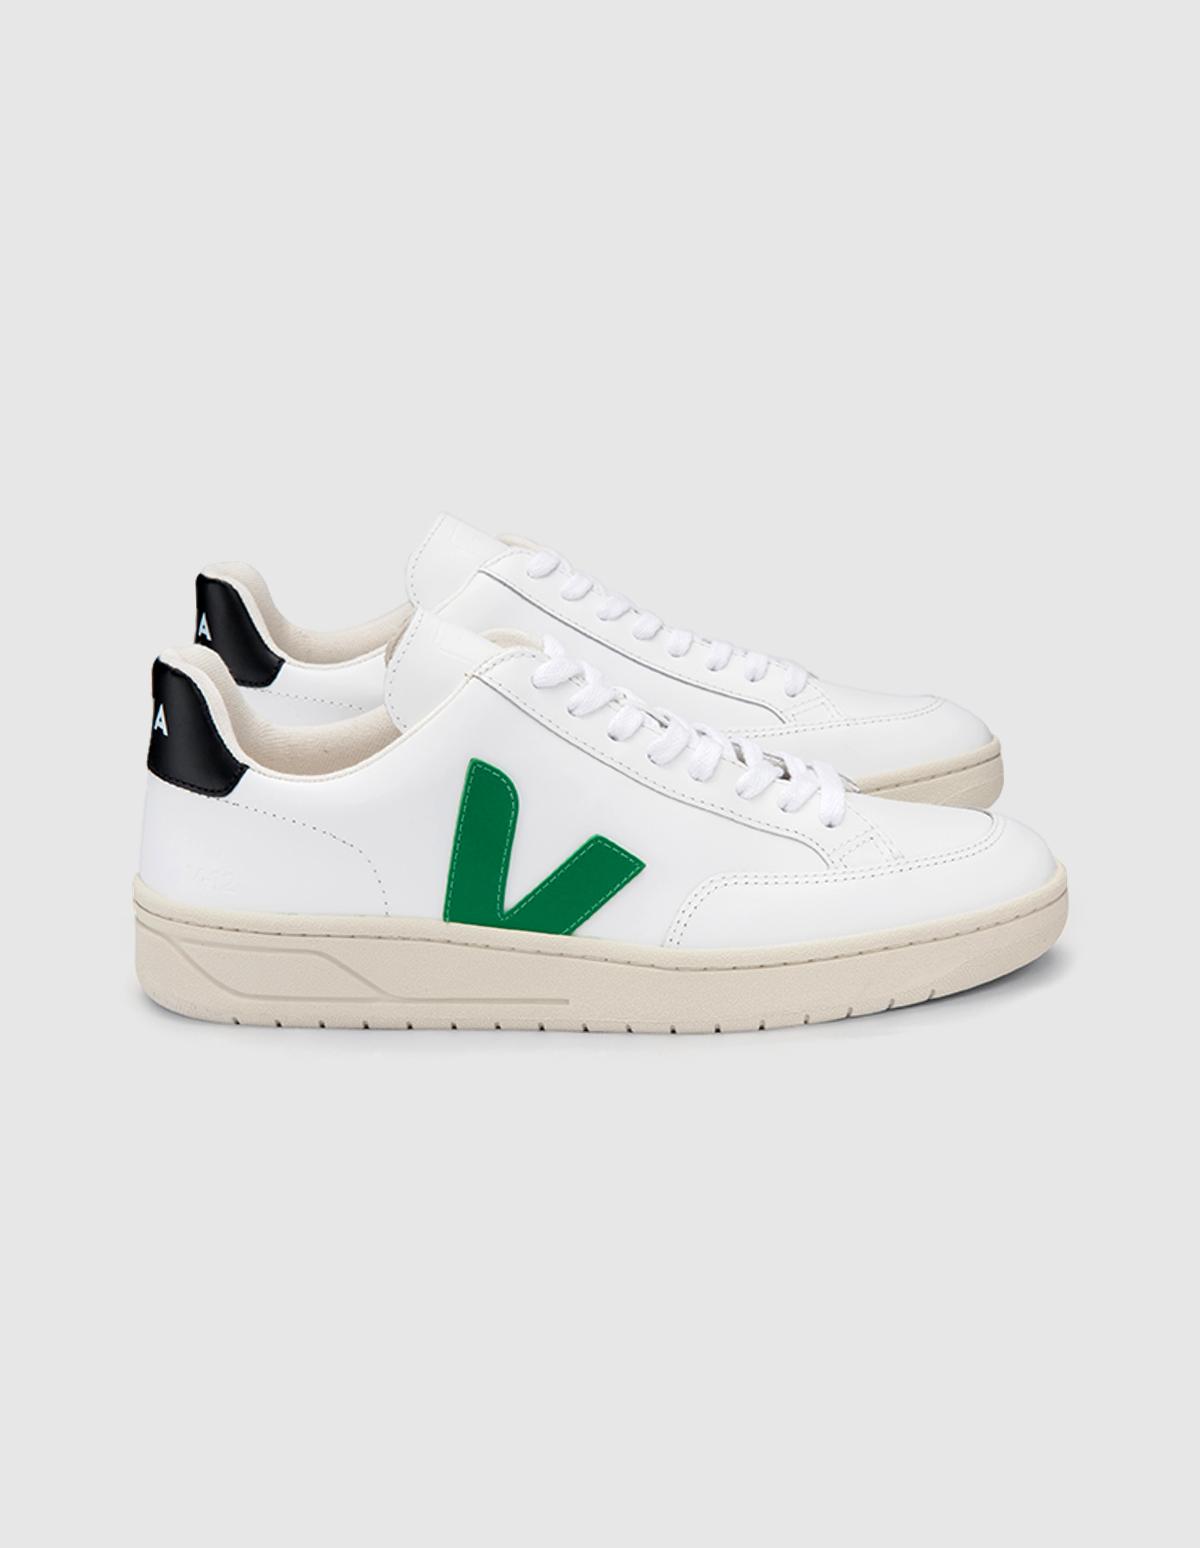 V-12 Leather in Extra White Emeraude 